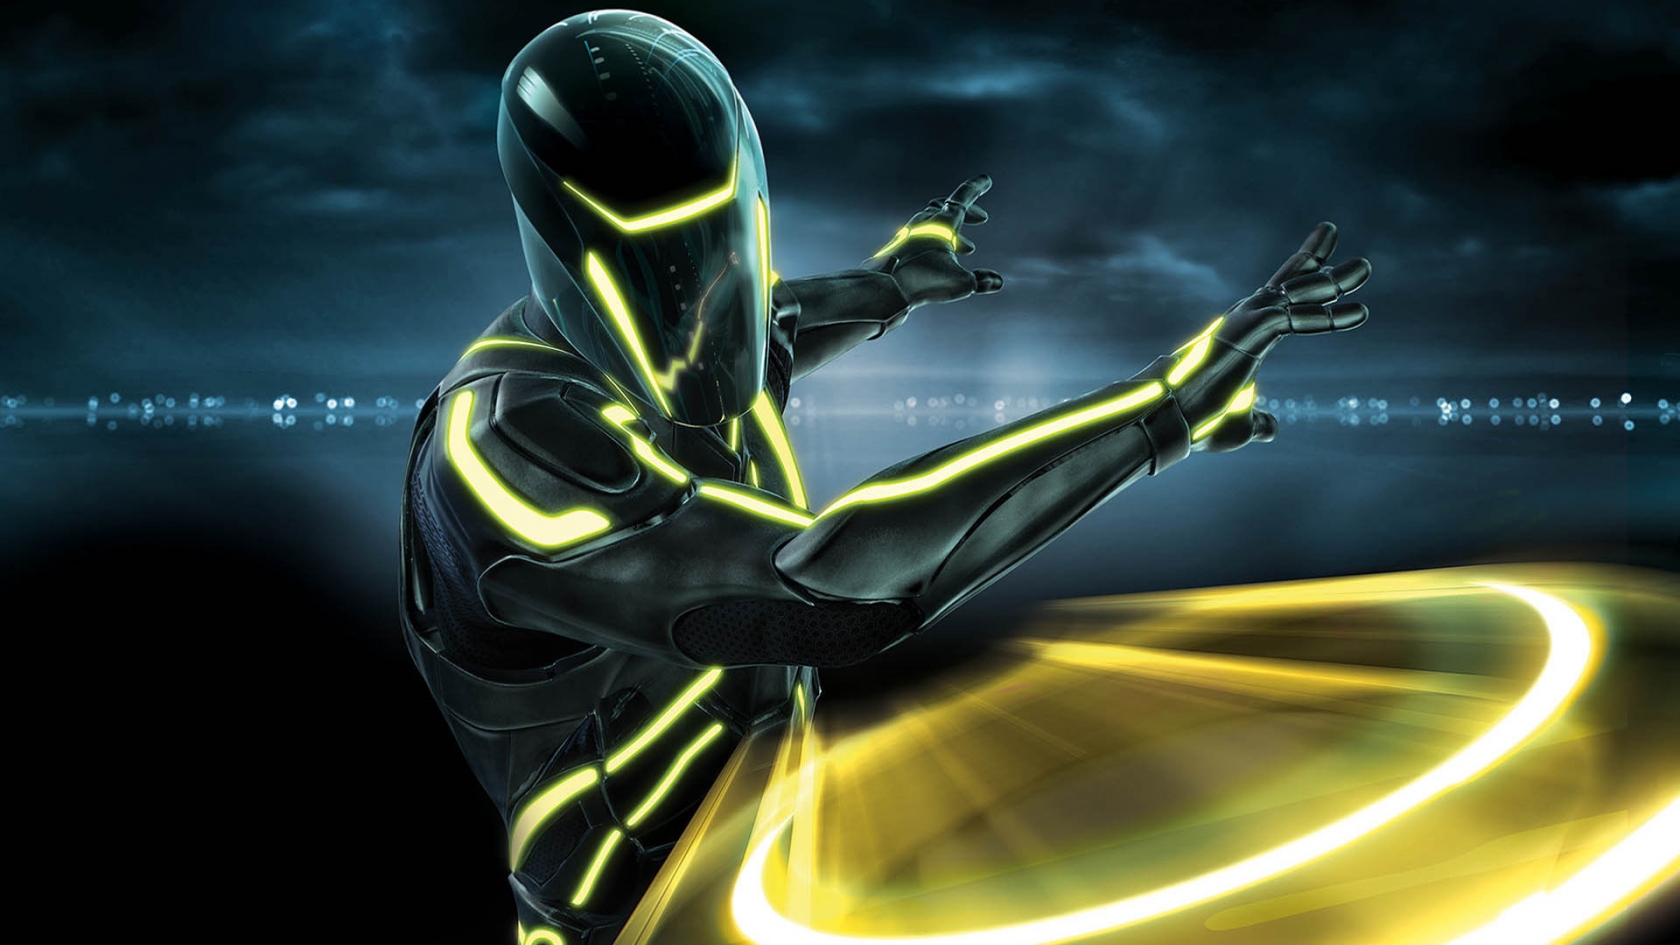 Tron Legacy Clu for 1680 x 945 HDTV resolution